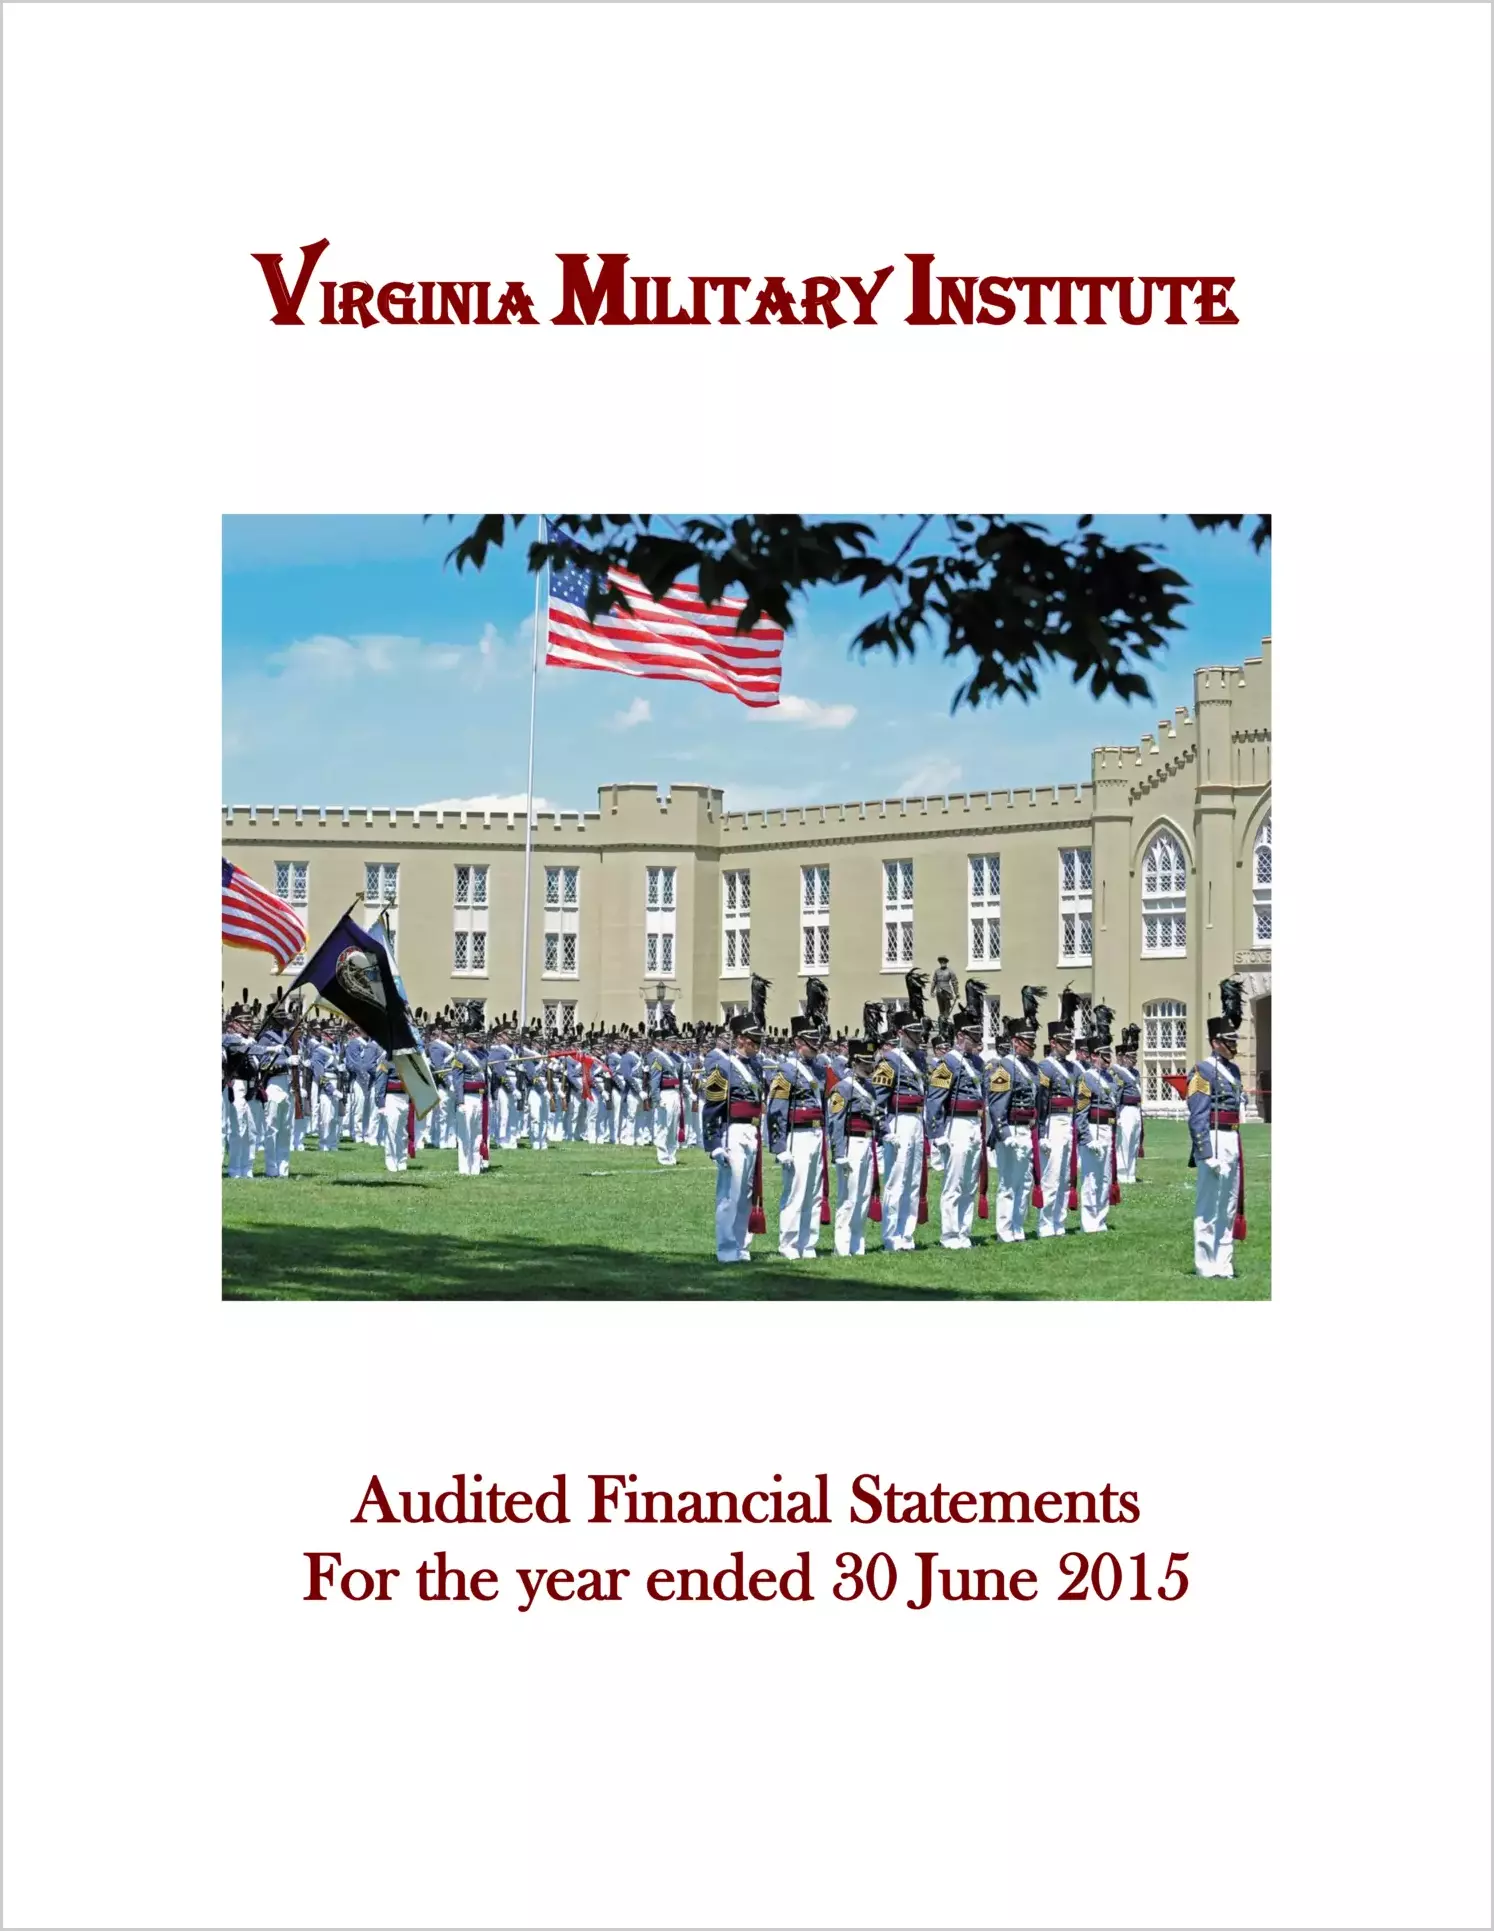 Virginia Military Institute Financial Statements for year ended June 30, 2015